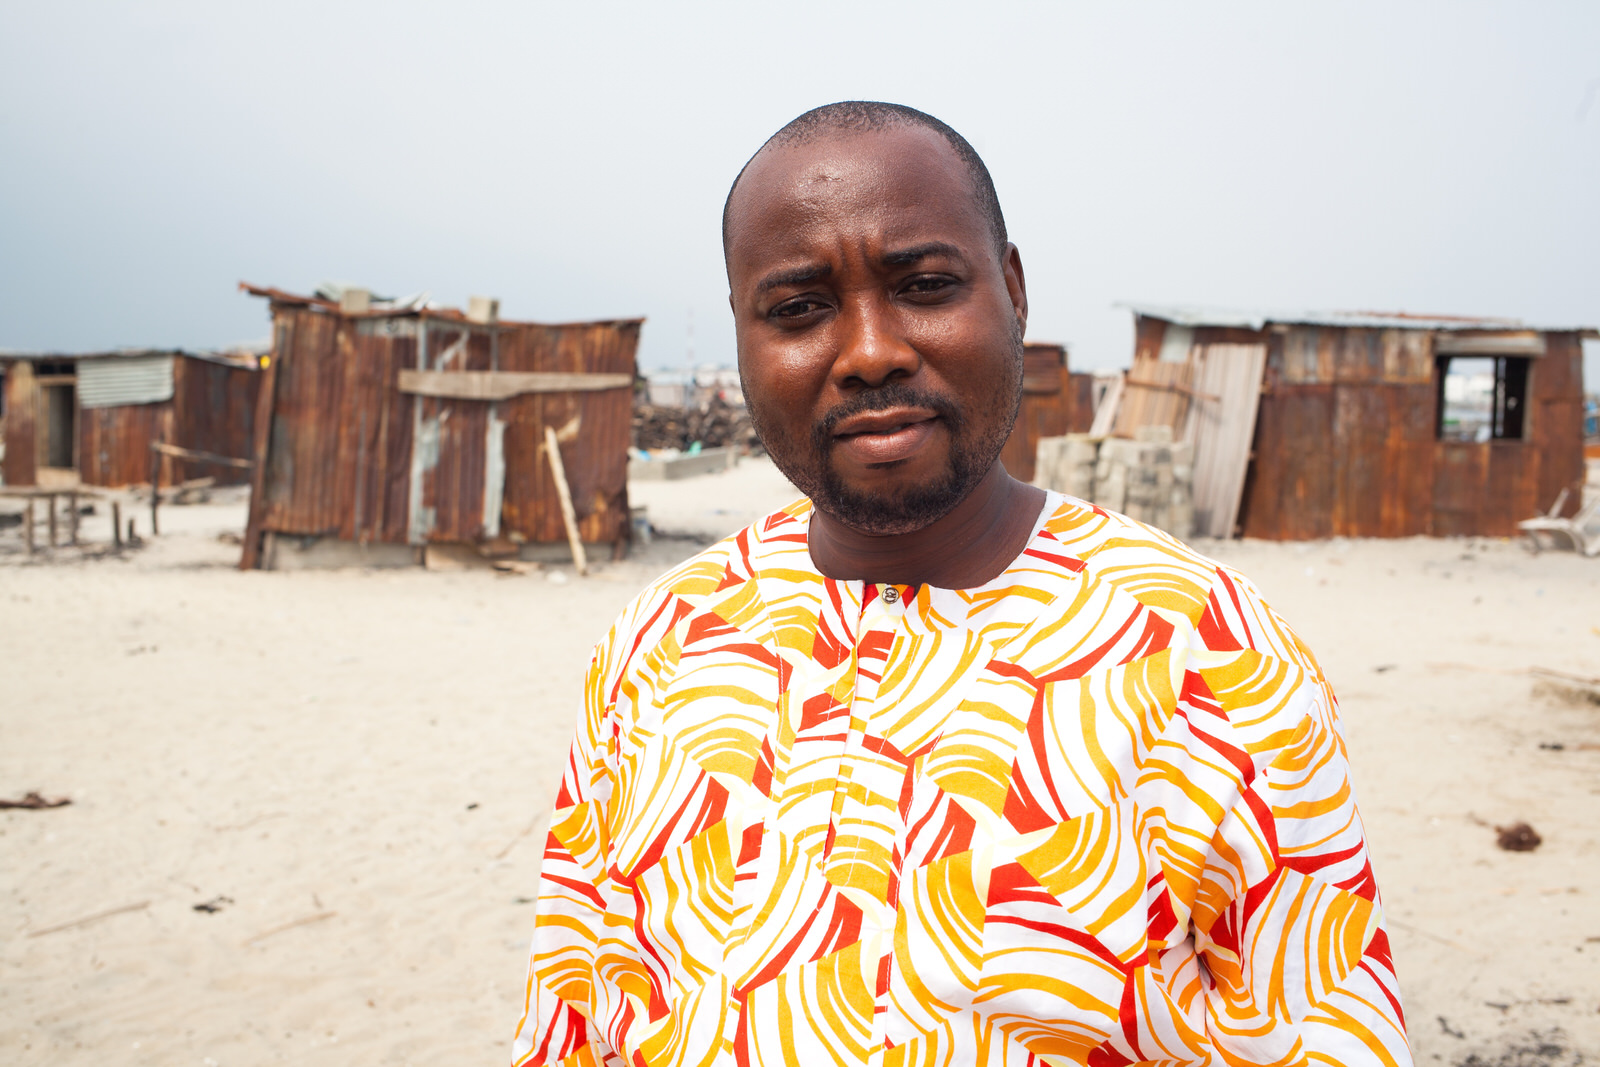  Samuel is a member of the Nigerian Slum / Informal Settlements Federation, a grassroots movement of the urban poor. The Federation works to solve justice and development problems in Nigeria. 